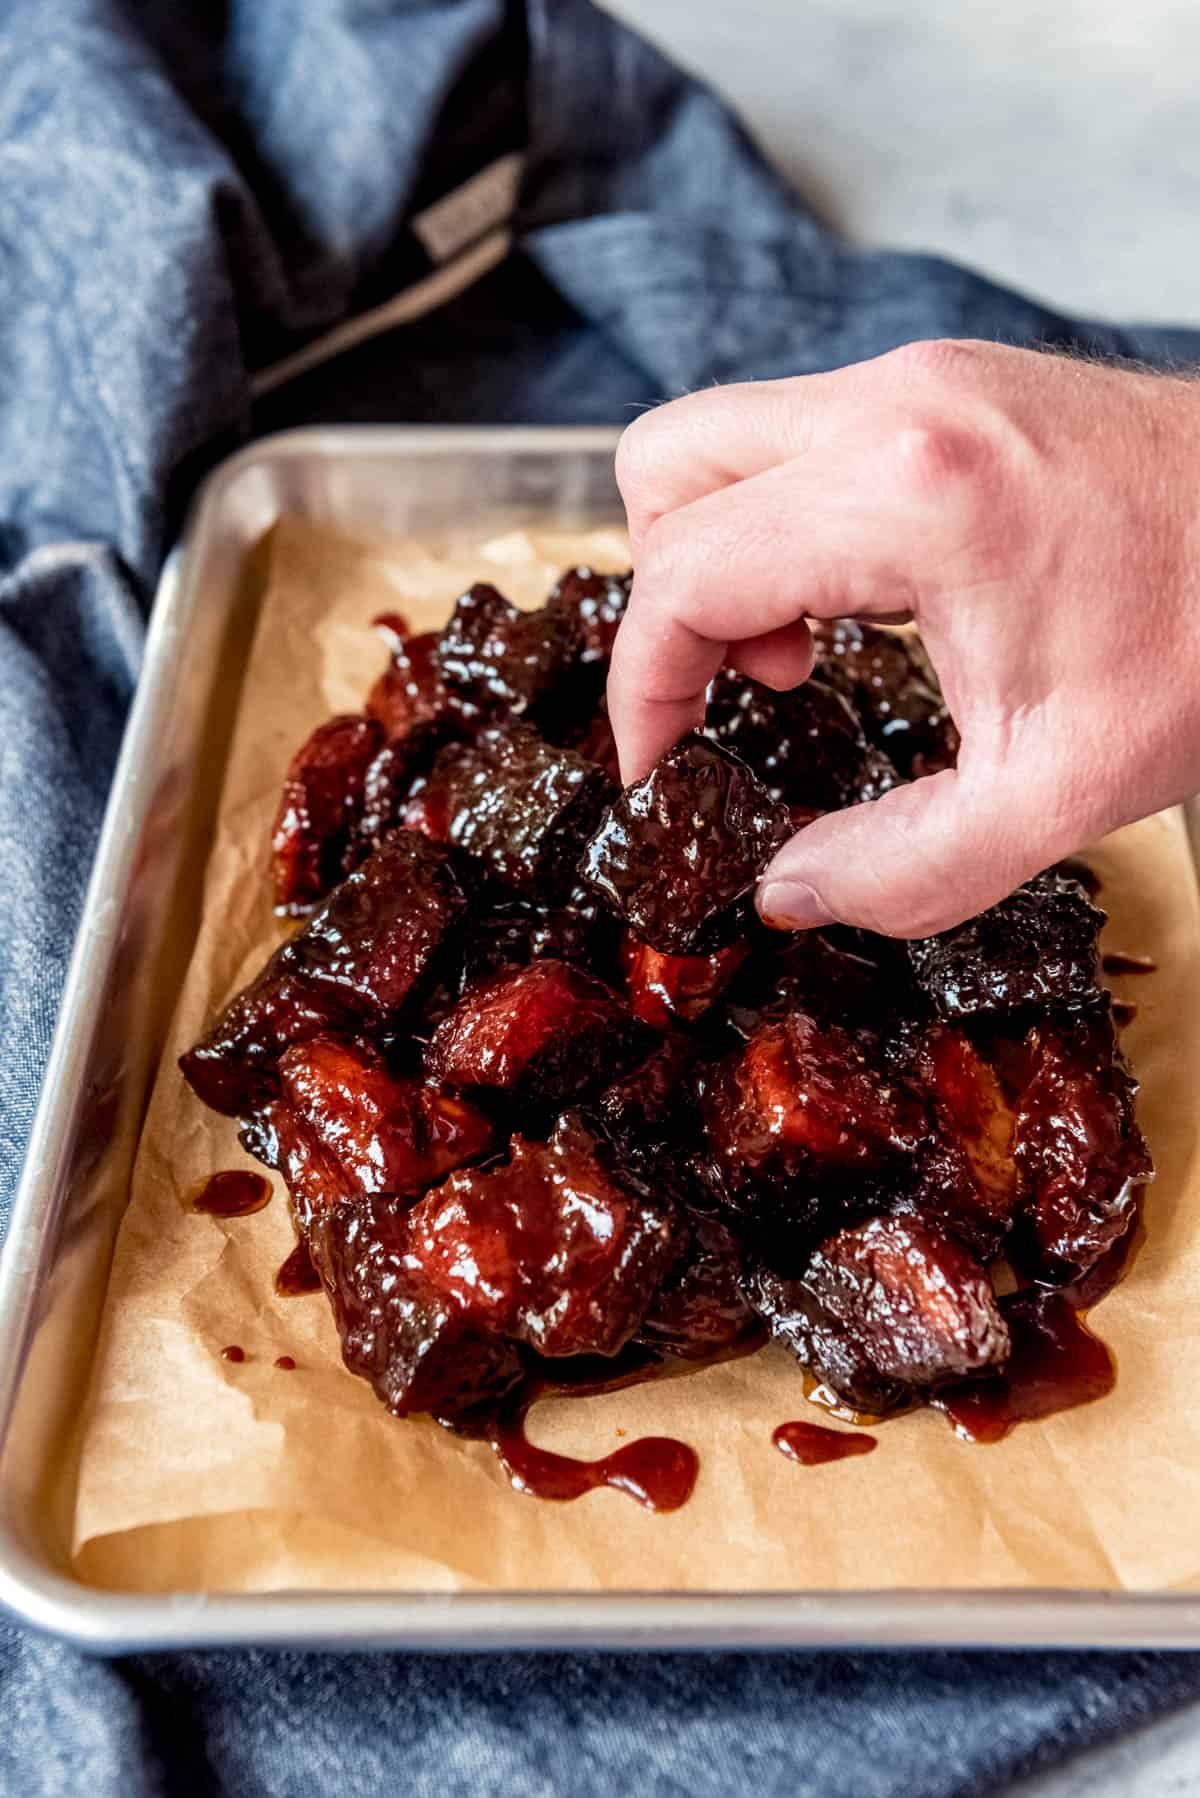 An image of a hand picking up a cube of smoked pork belly burnt ends.